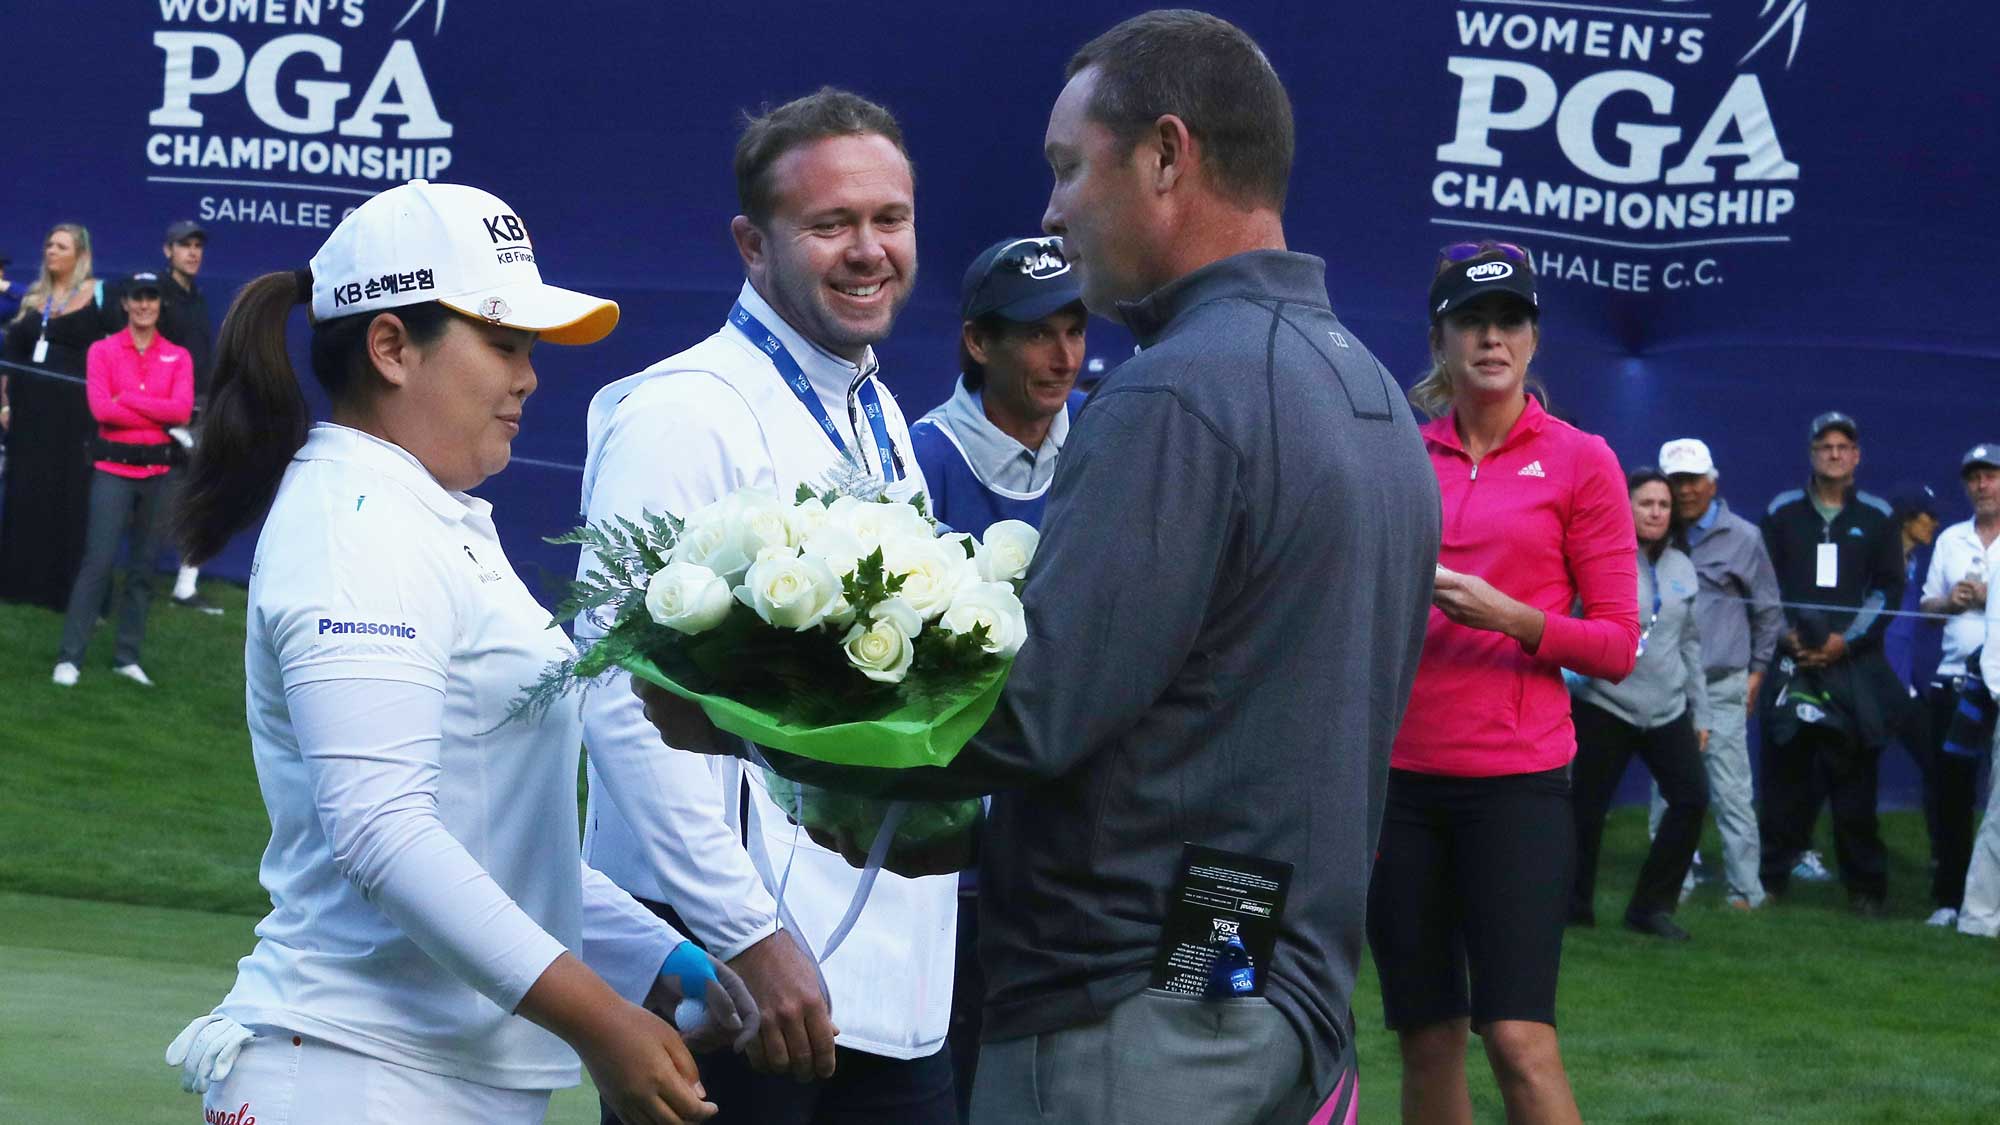 Inbee Park of South Korea is greeted with flowers on the 18th green by LPGA Tour commissioner Mike Whan after Park gained entry in the LPGA Hall of Fame after finishing the first round of the KPMG Women's PGA Championship